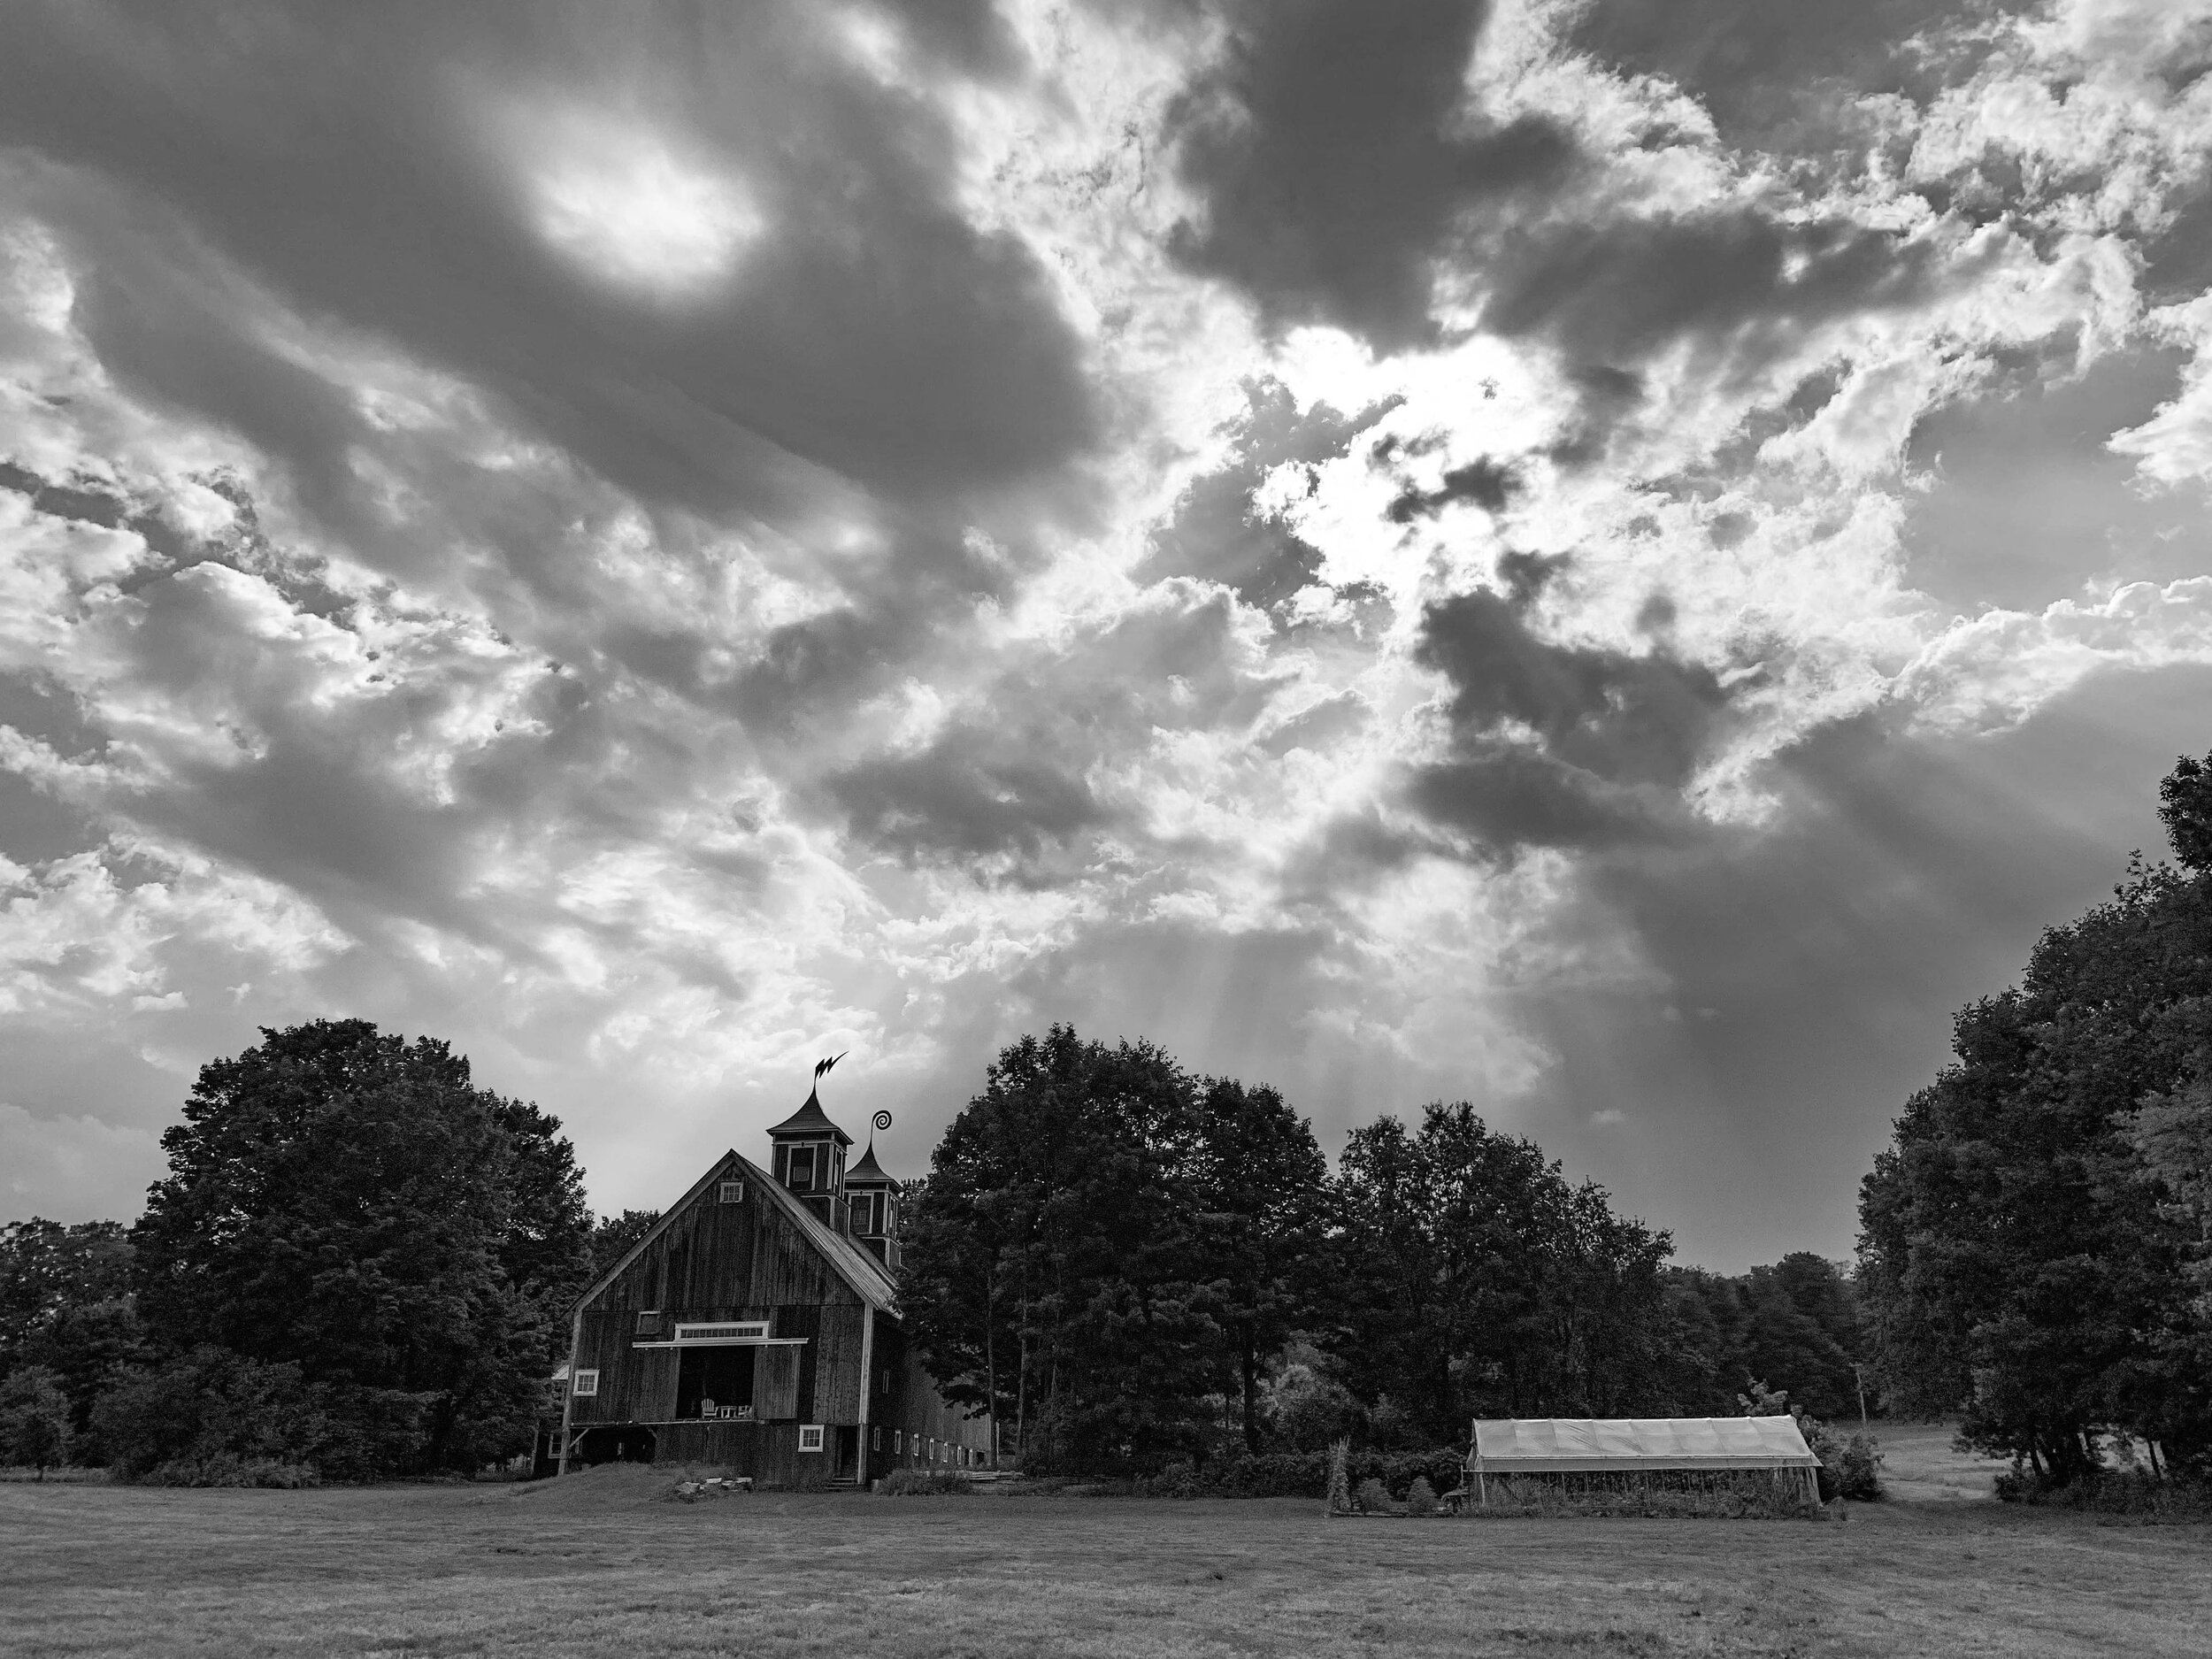 A black and white photo of a cloudy day on the farm